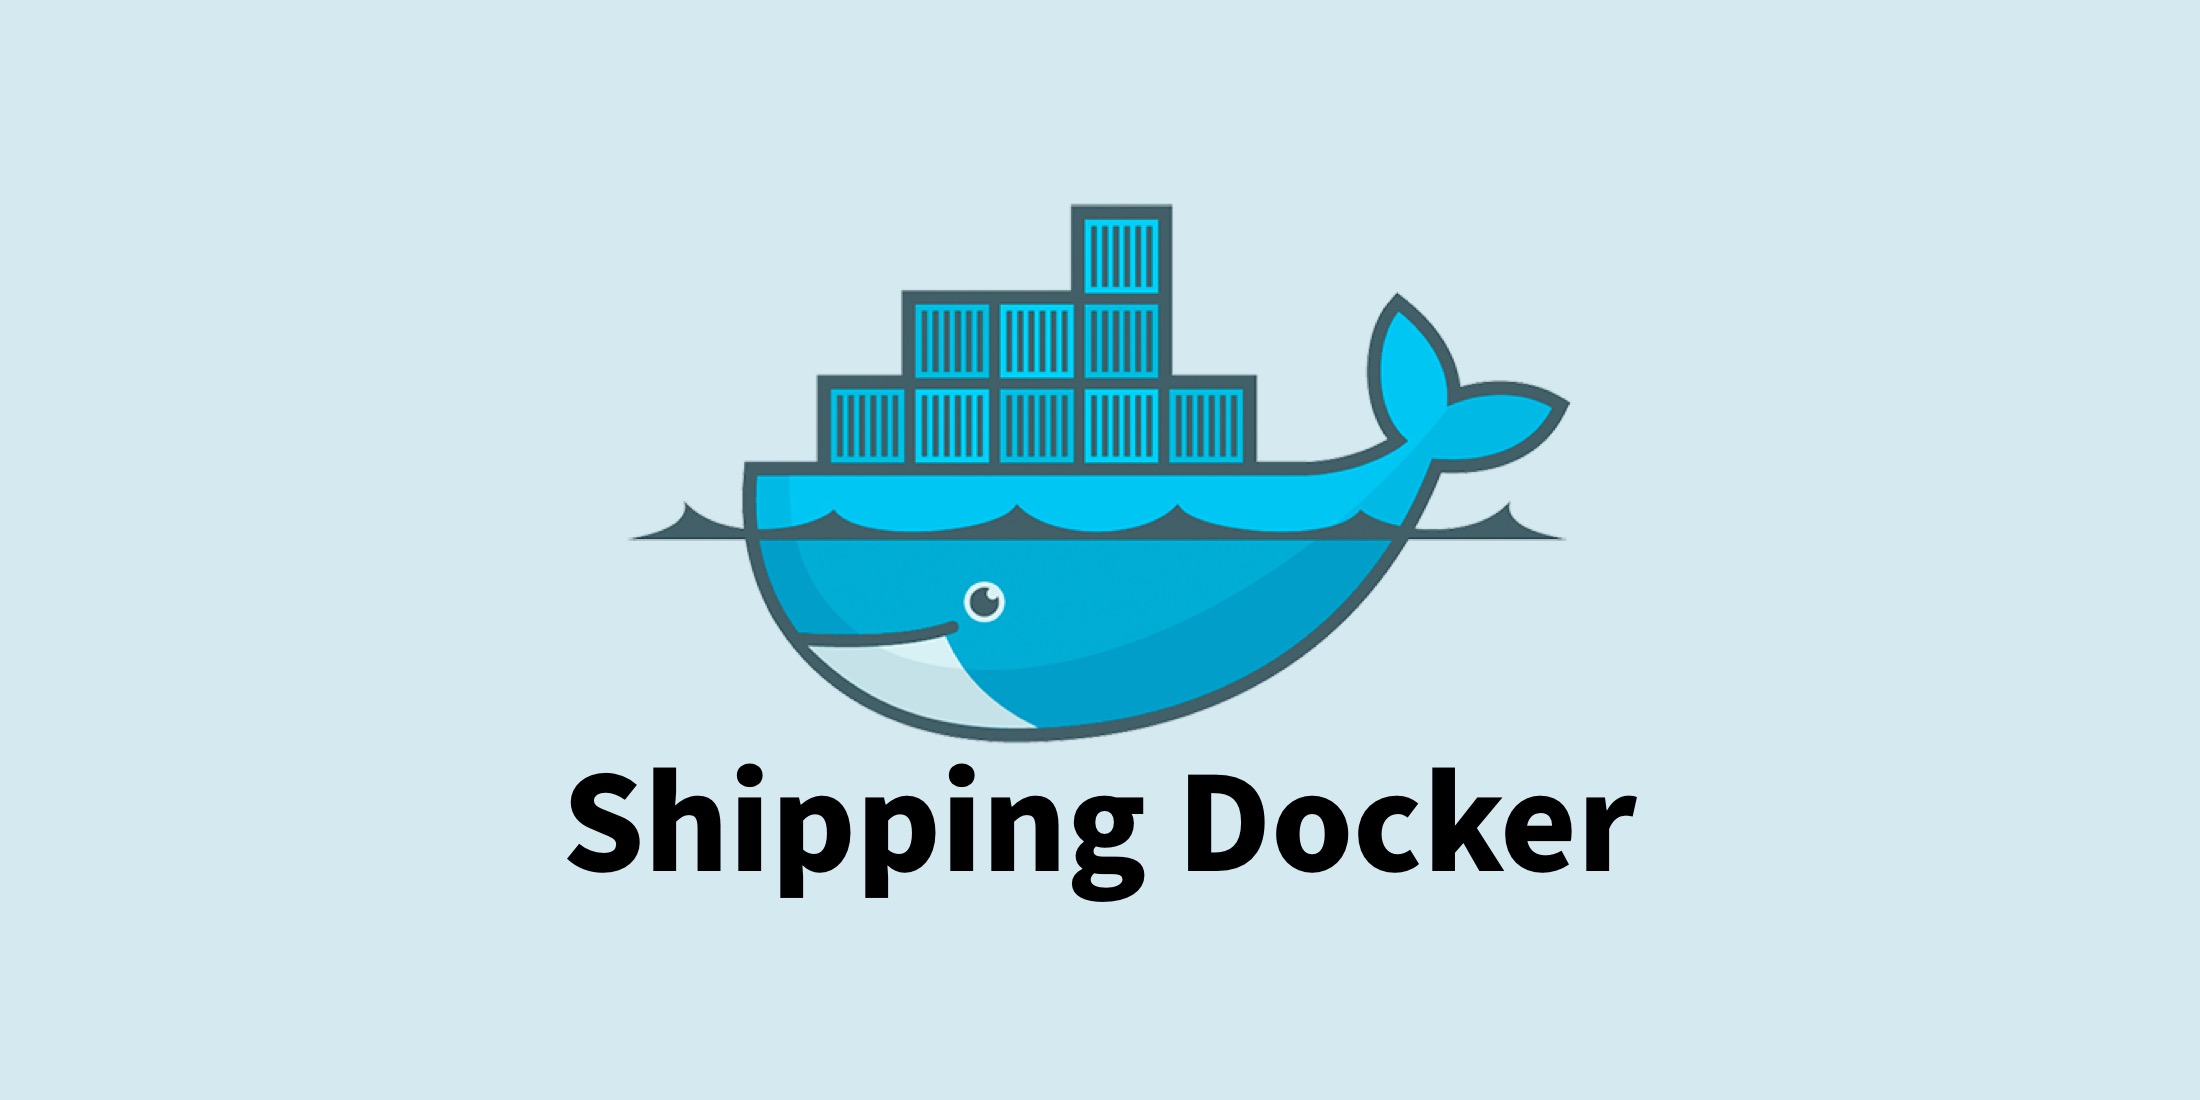 Shipping Docker - Learn how to use Docker in development, testing, and production. image